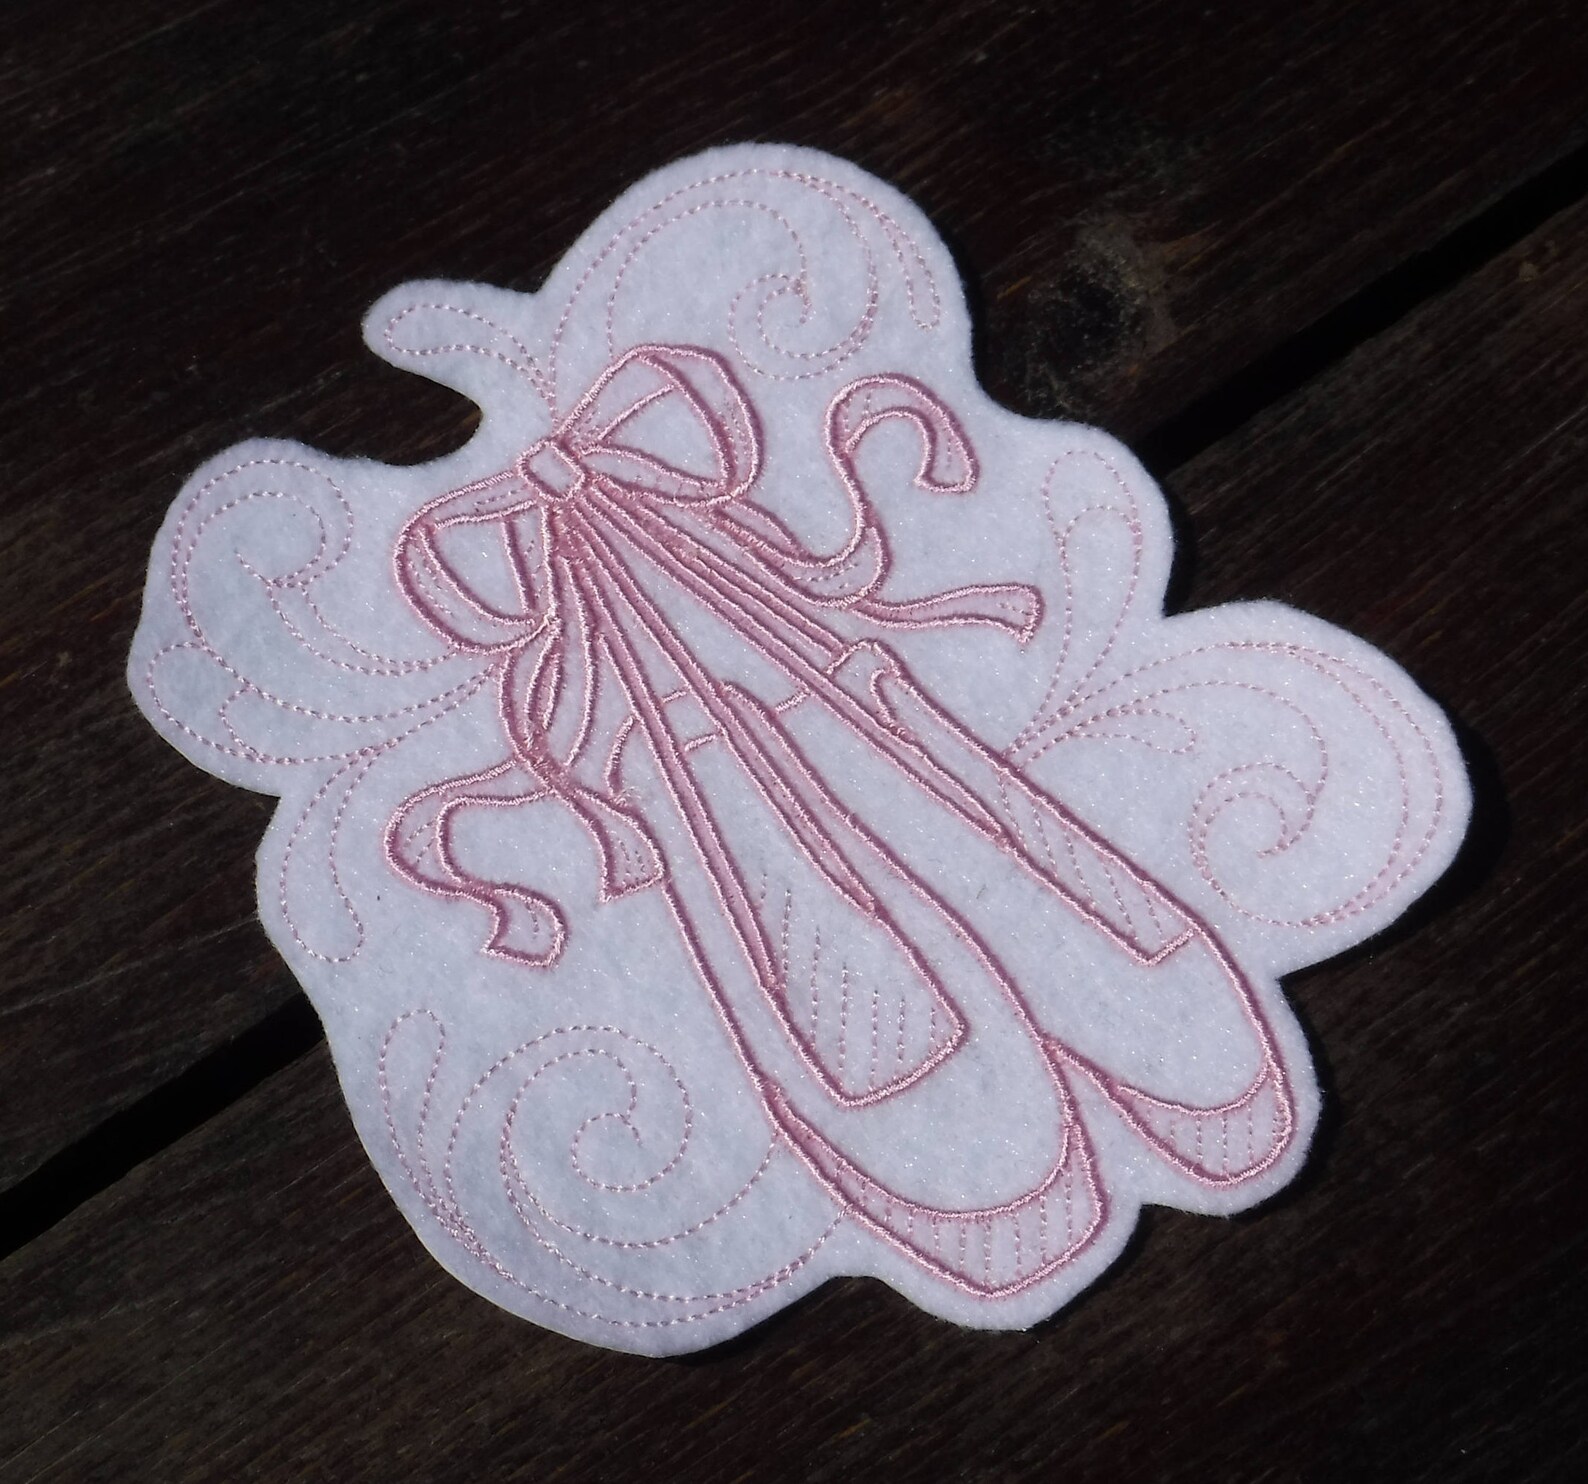 ballet patch - ballet shoes - iron on patch - embroidered applique - ballet gifts - embroidered gifts - pink patch - ballerina g